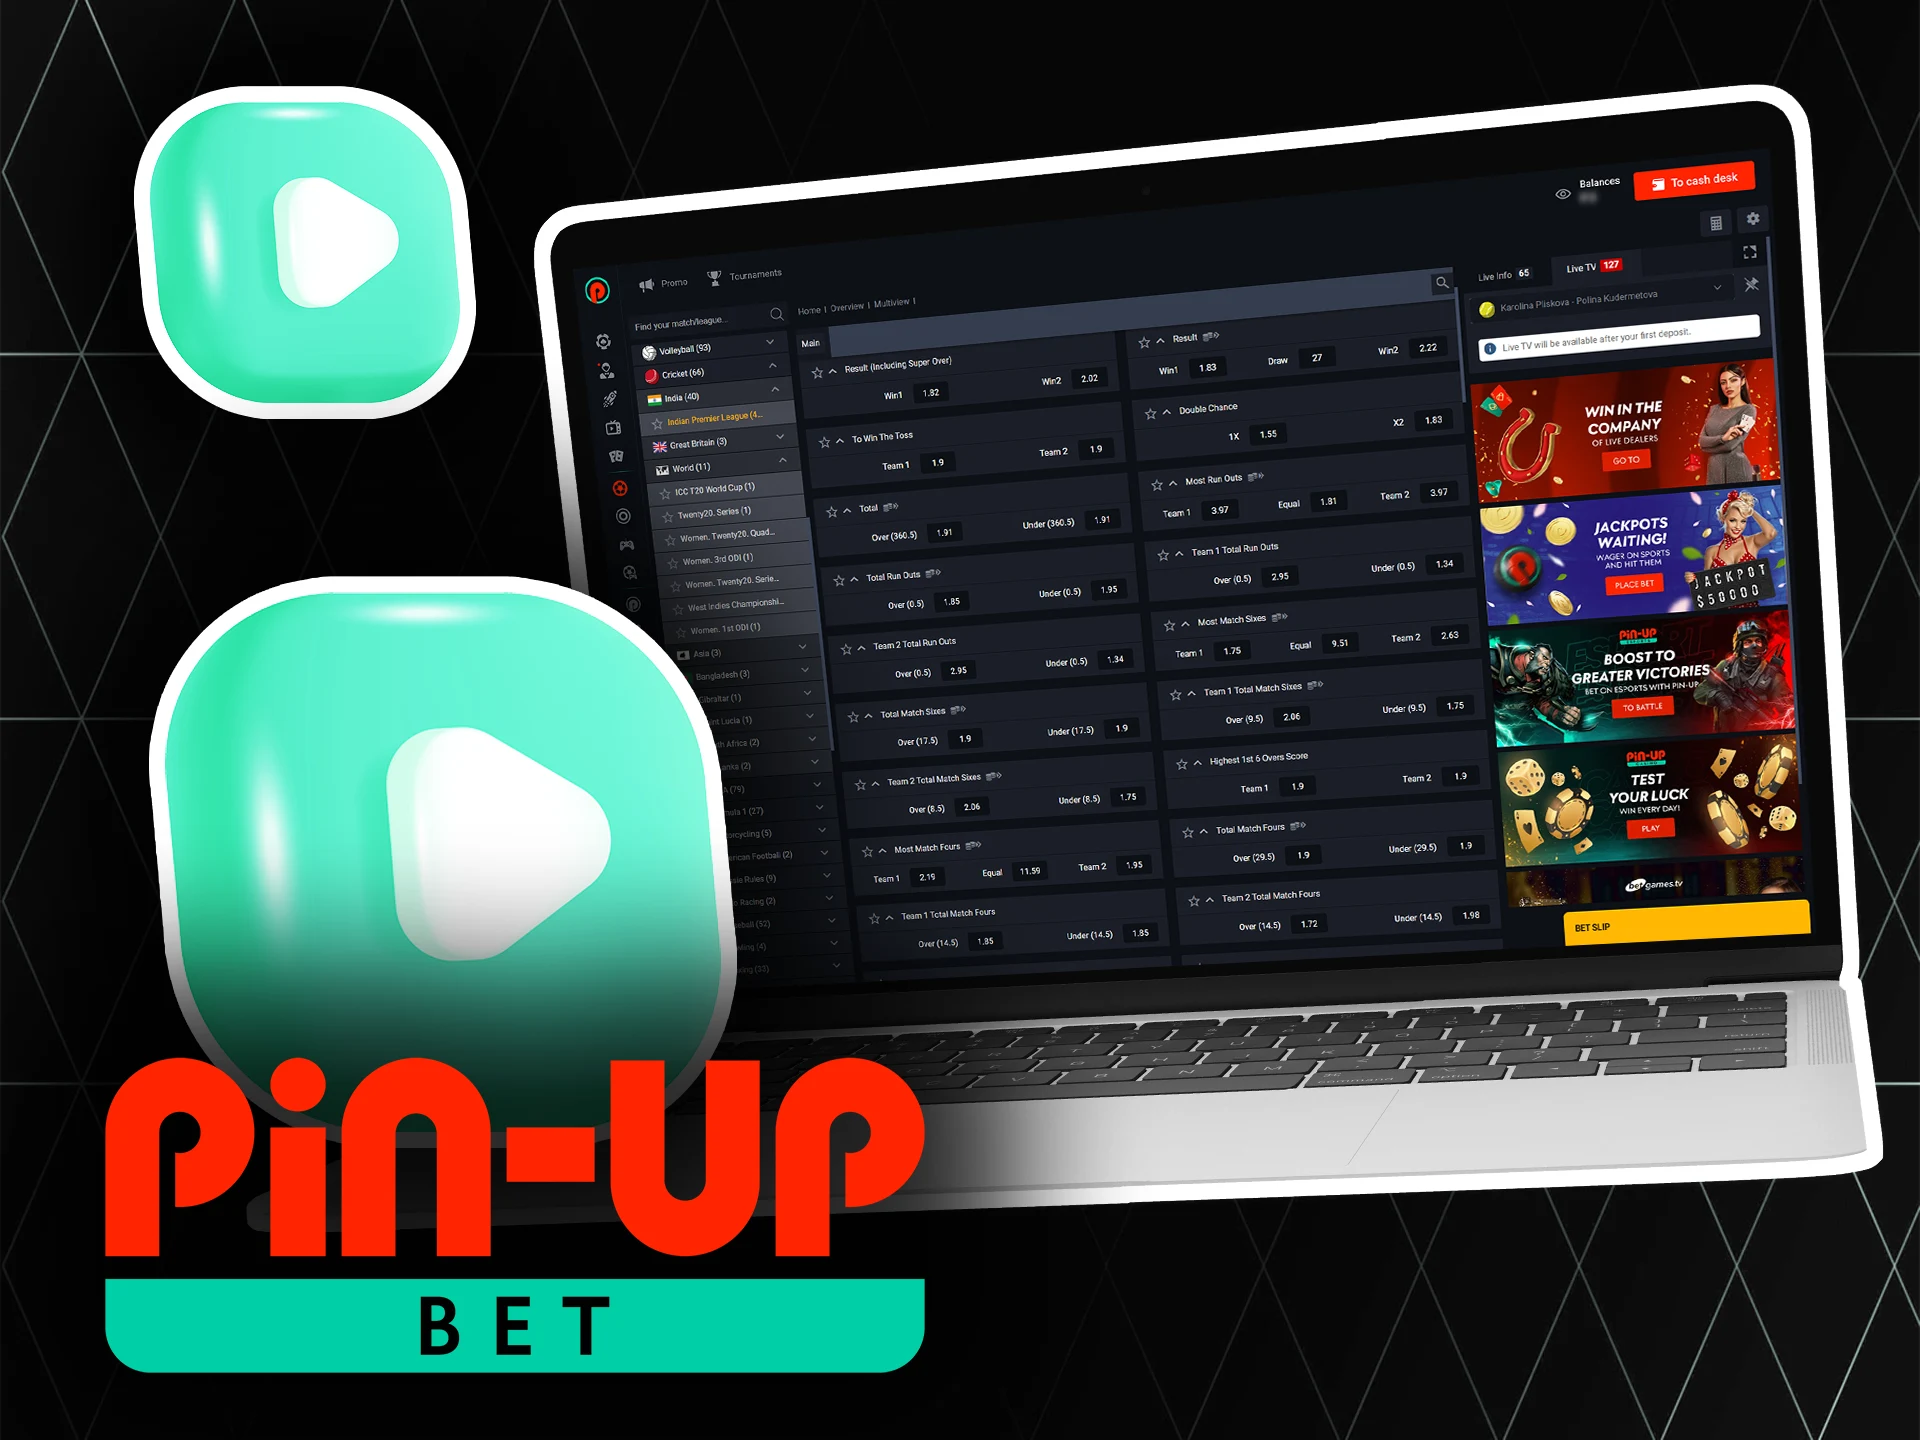 Live betting at Pin-Up allows you to place bets during the match.